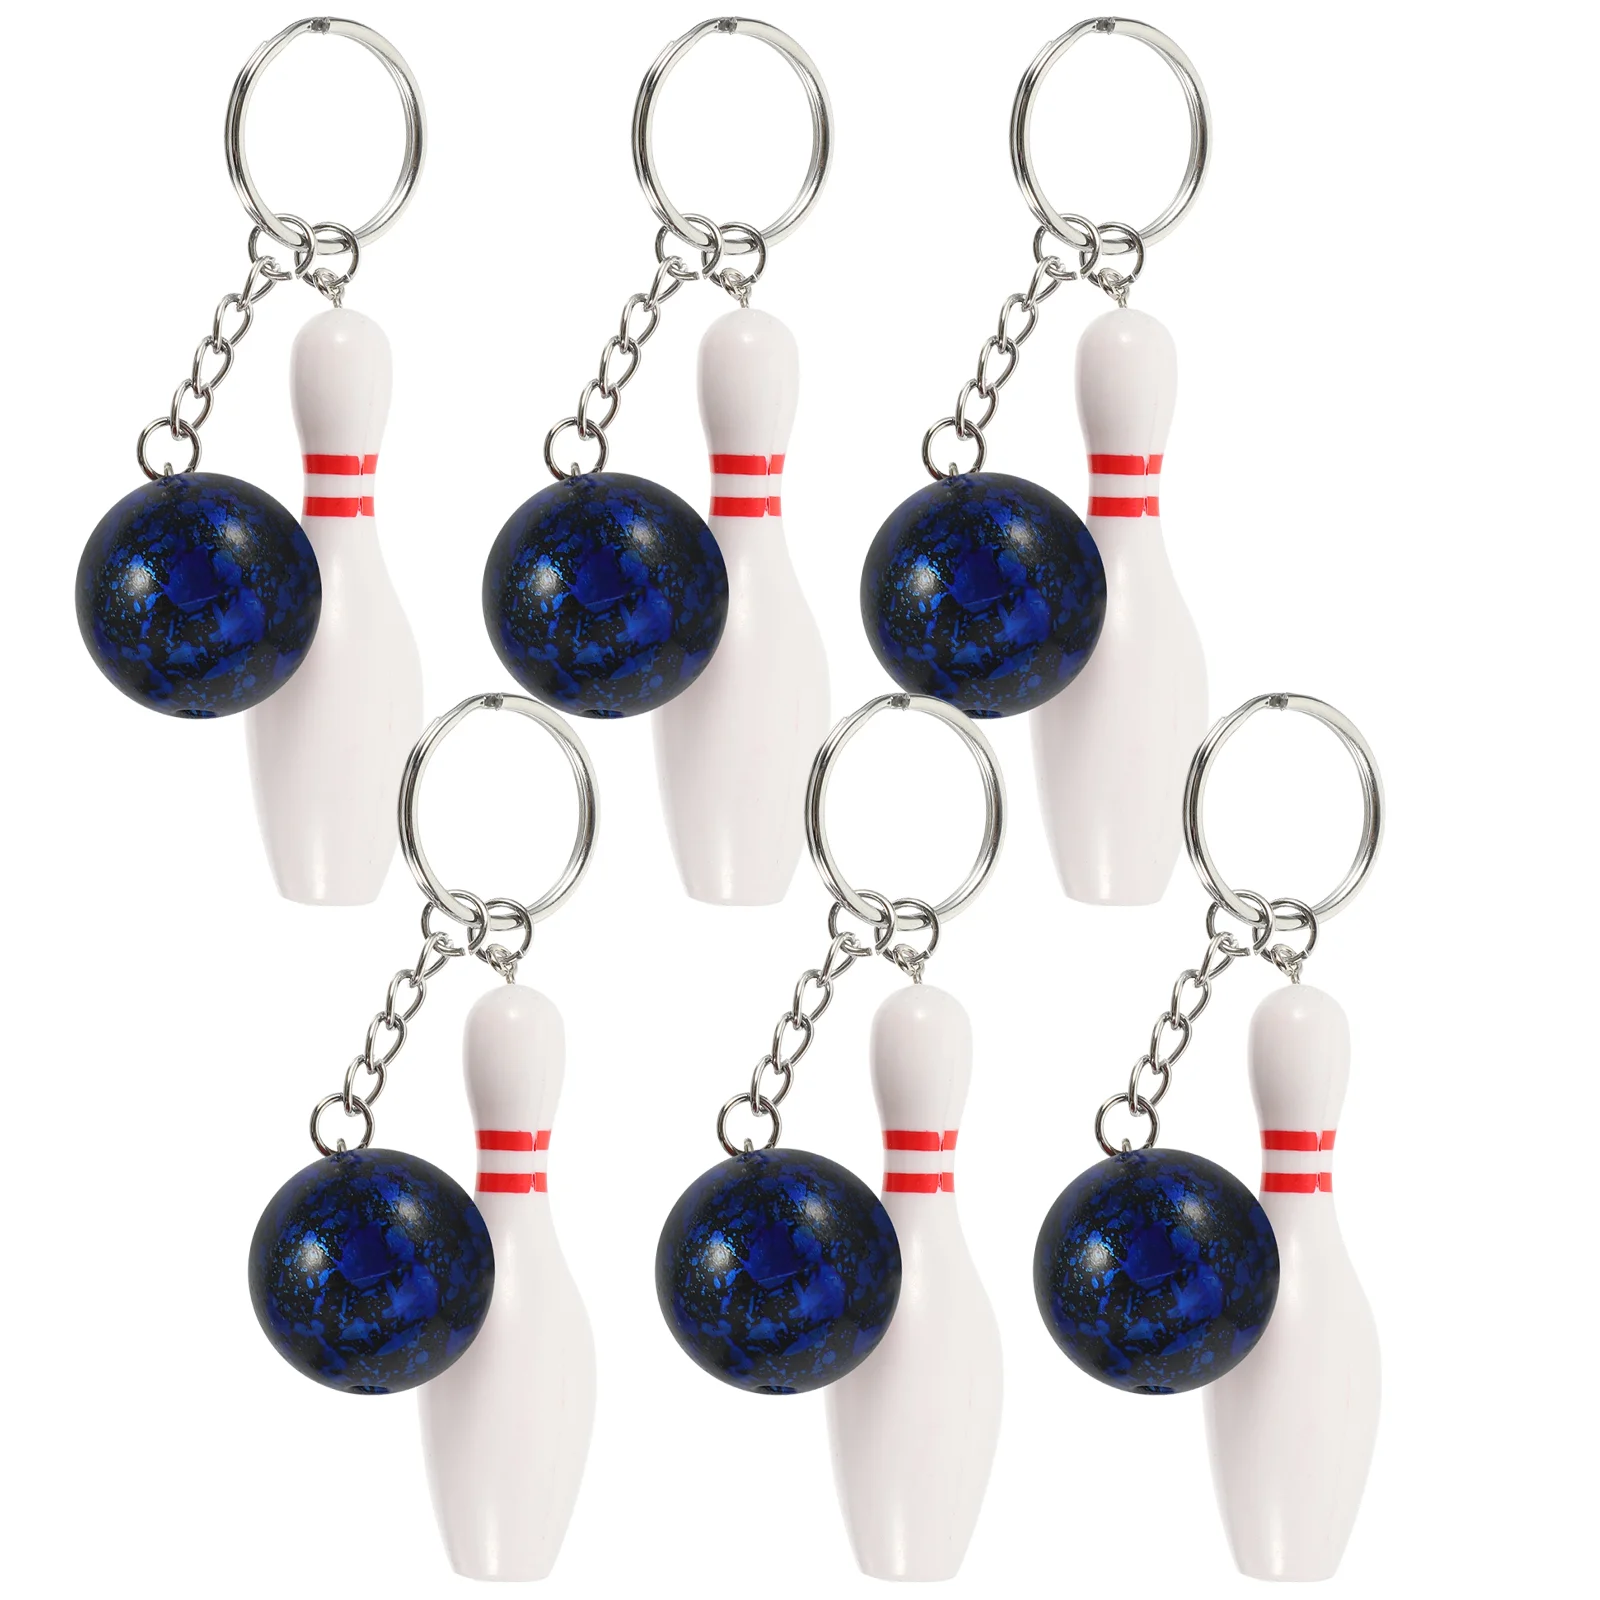 6pcs Bowling Keychains Bowling Pin Keychain Bowling Party Favors Bowling Gifts